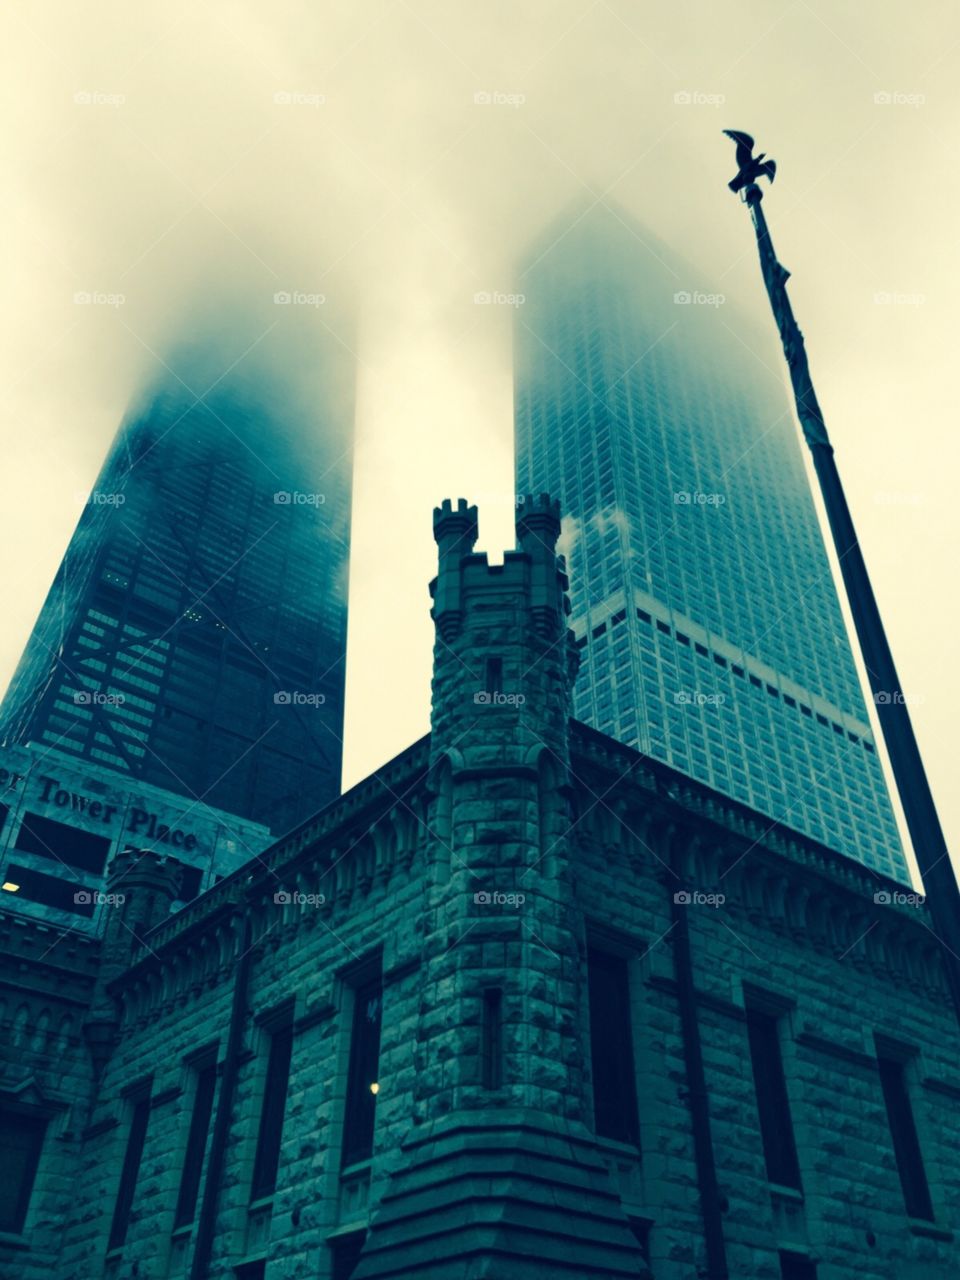 Fog in the city. Fog working it's way up the buildings in Chicago.